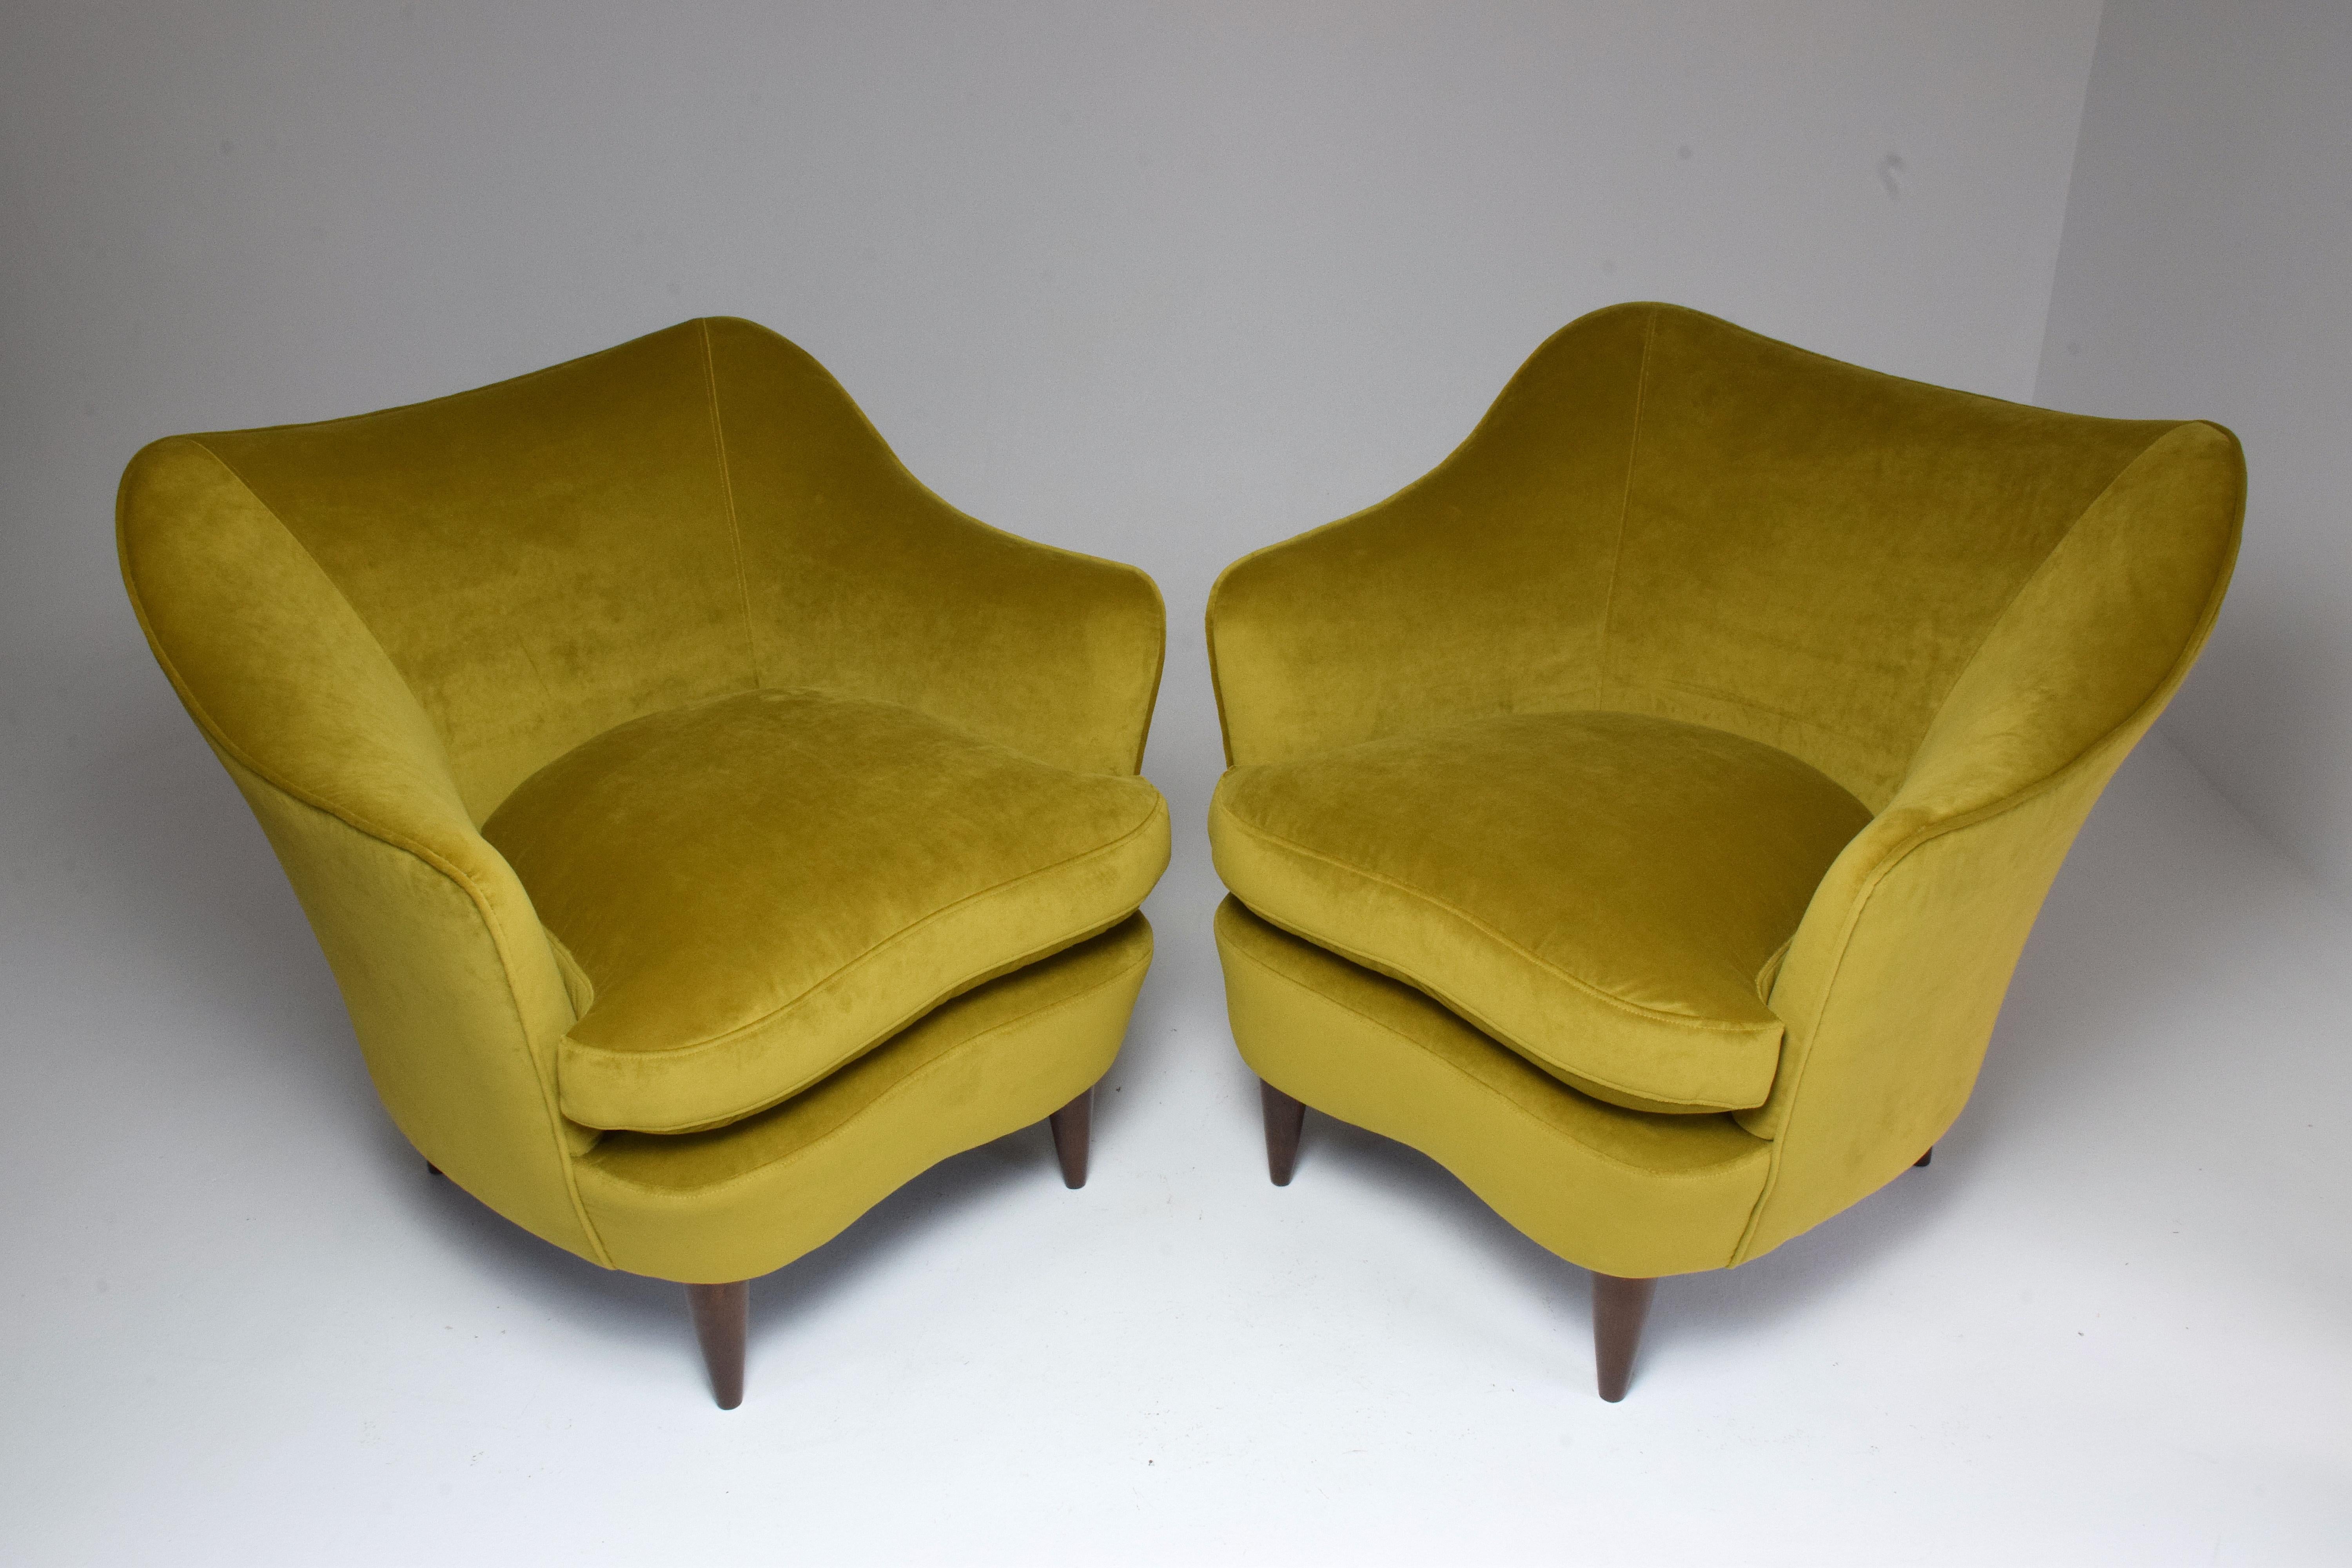 A set of two Italian collectible vintage armchairs designed by Gio Ponti for manufacturing company Casa e Giardino in the late 1930s.
In fully restored condition with new yellow velvet upholstery and removable cushions.
Italy, circa 1930s.